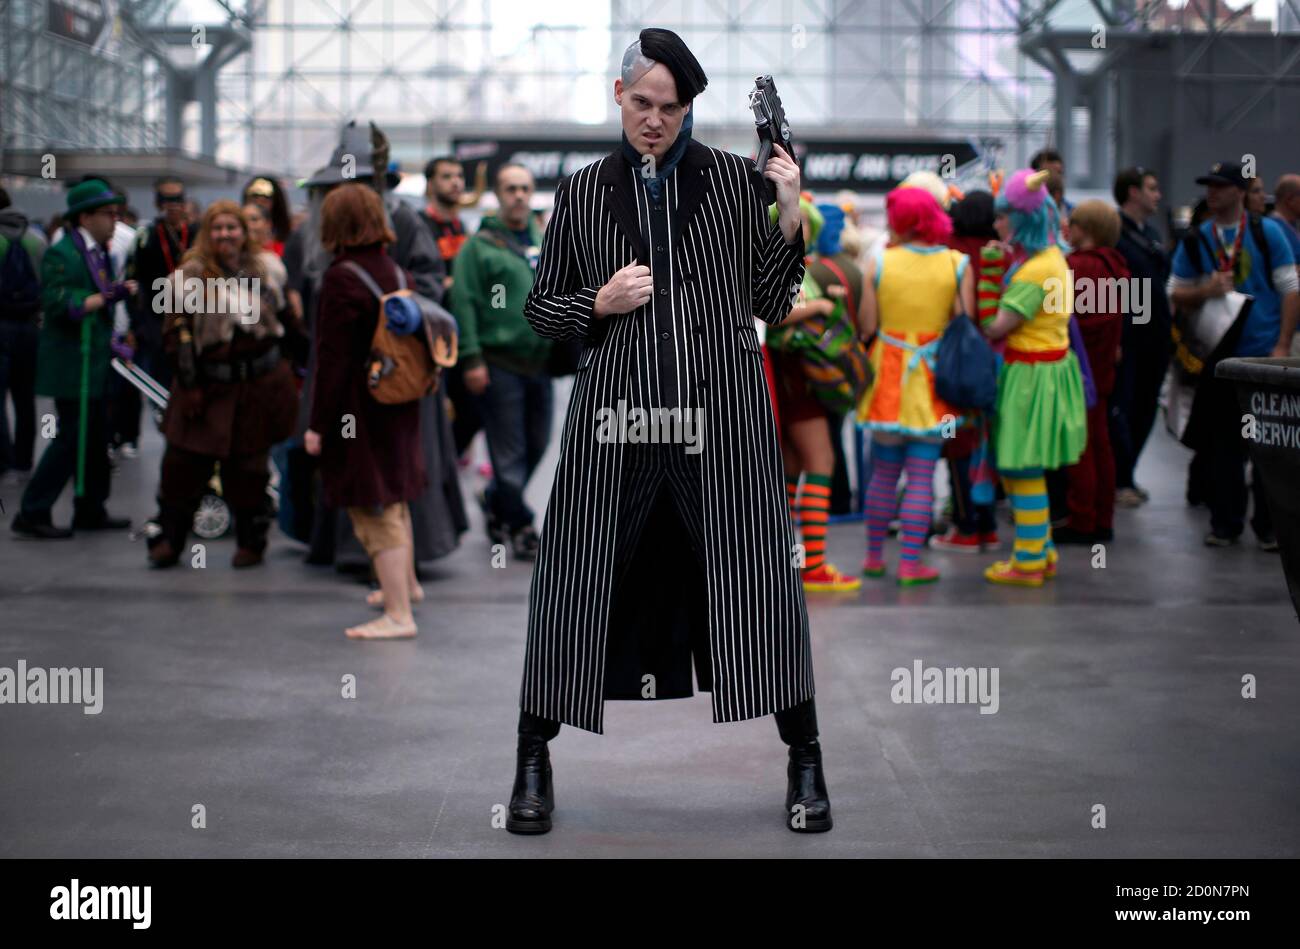 Chris Vick from Los Angeles, California, dressed as Jean Baptiste Emanuel  Zorg from the film "The Fifth Element" poses for a photograph at New York's  Comic-Con convention October 11, 2013. The event